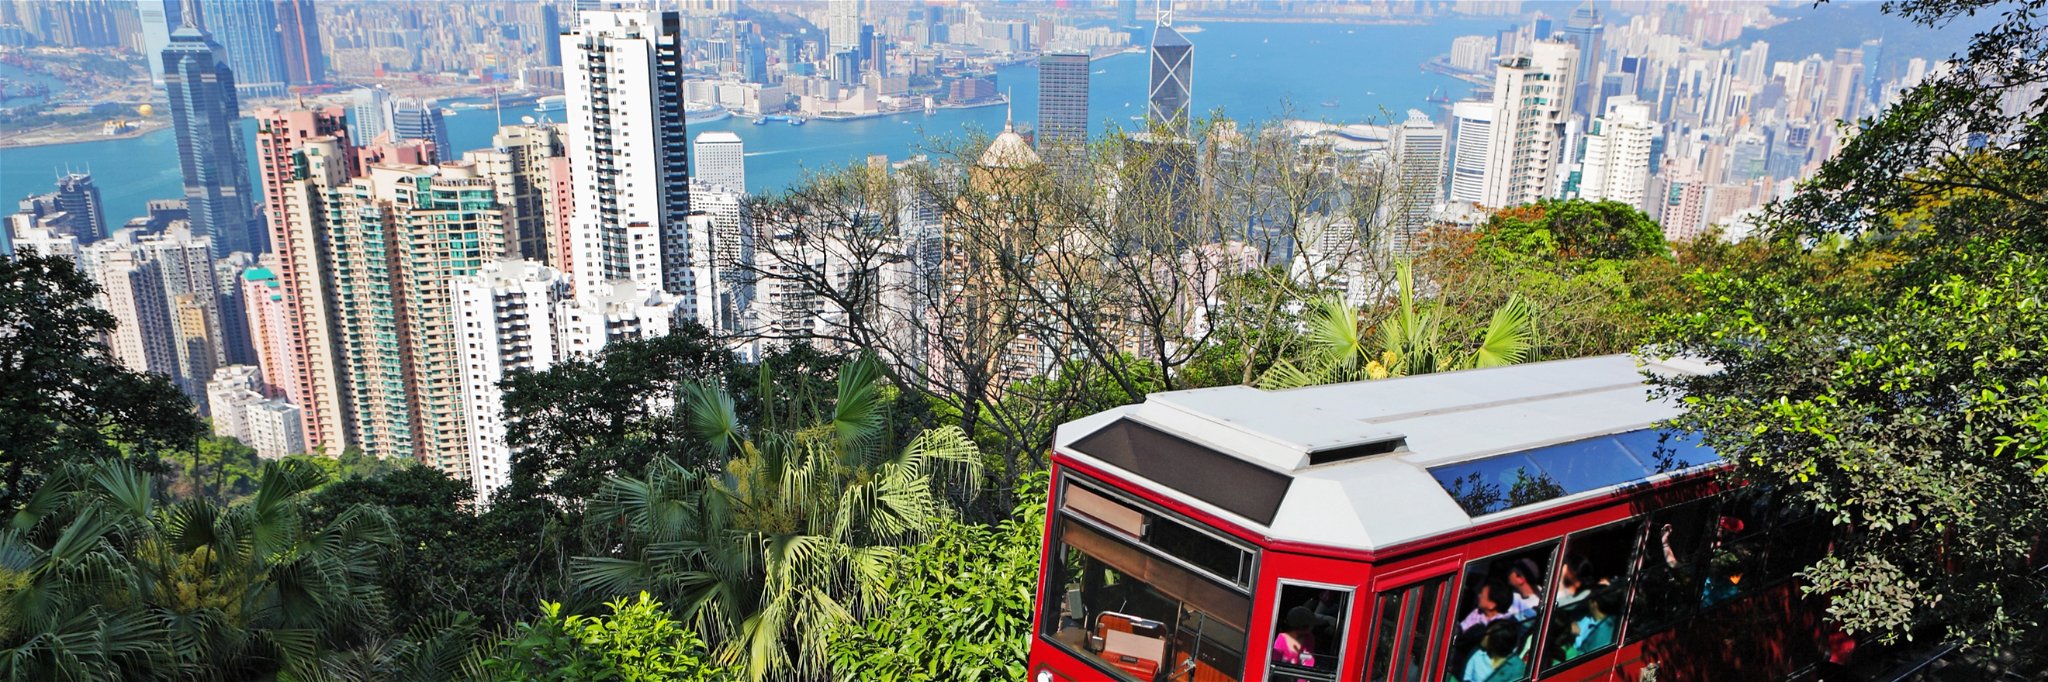 Hong Kong is to give away plane tickets to revive its Covid-battered tourism sector.